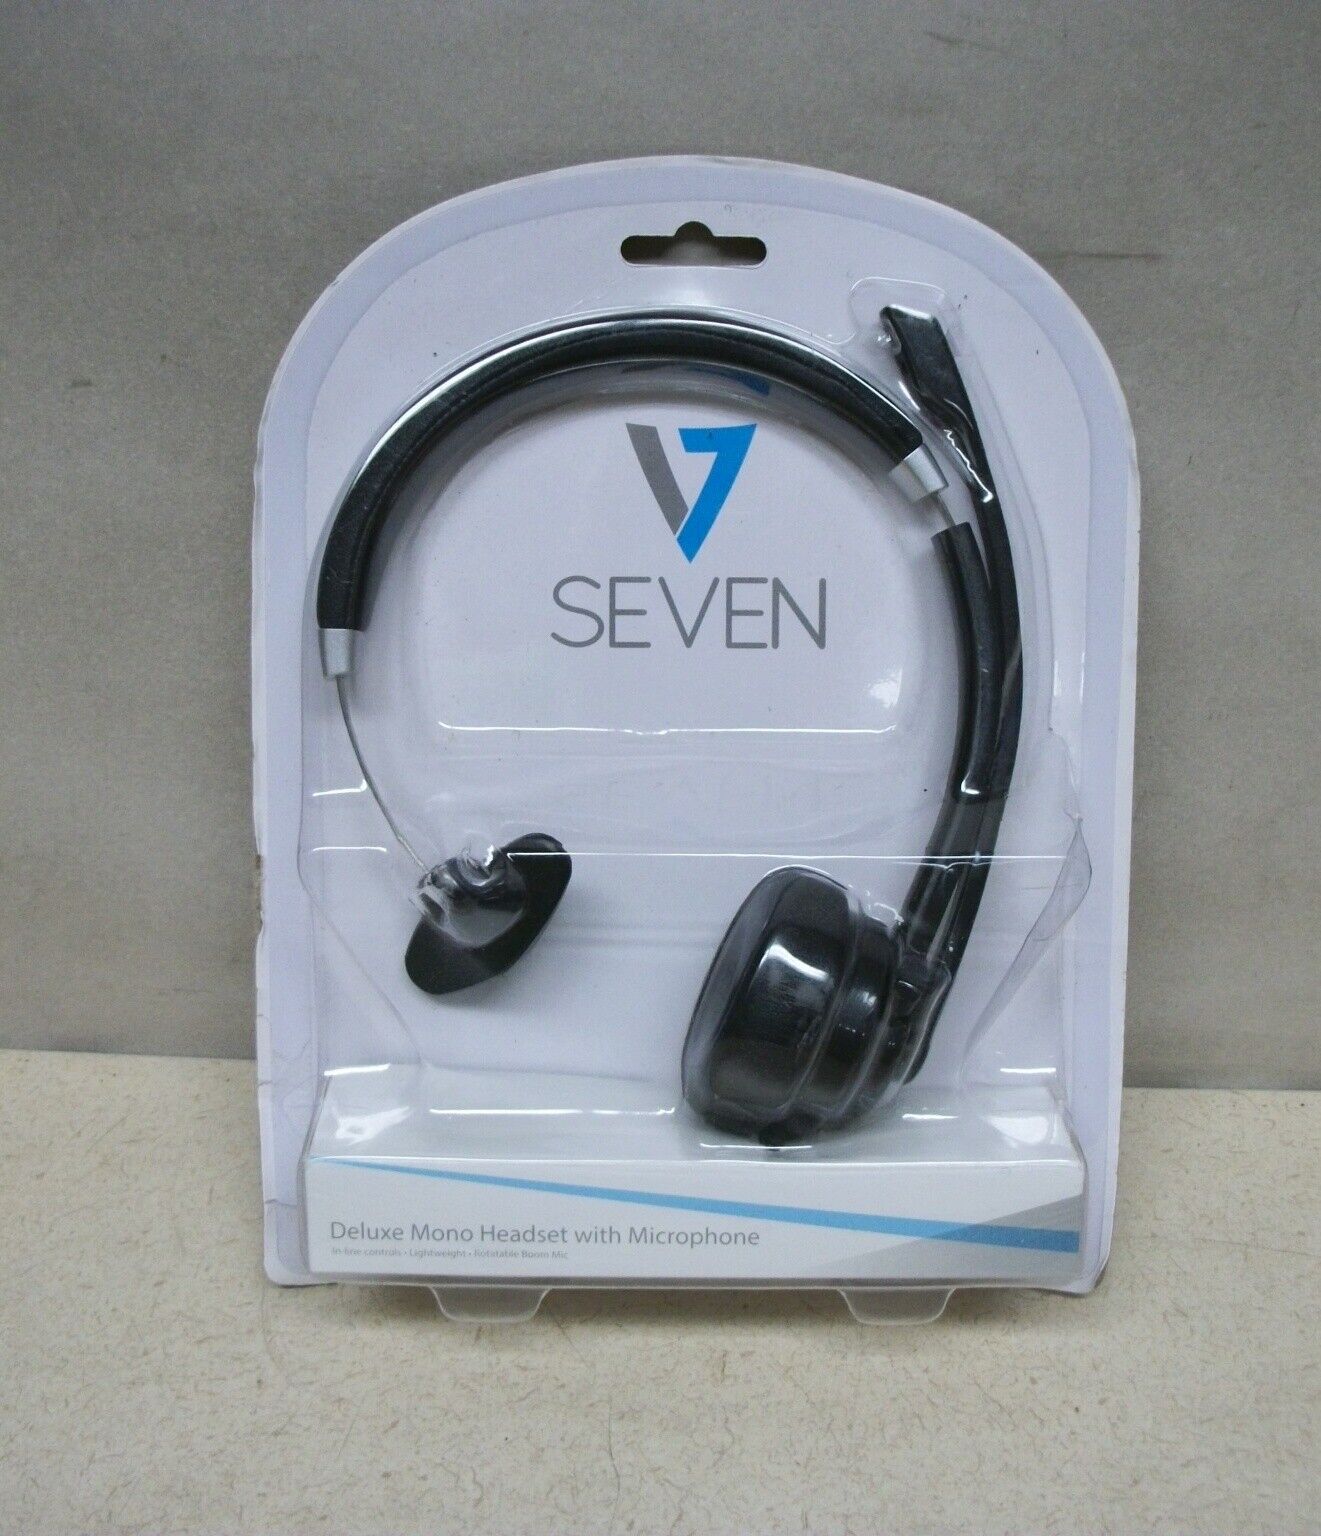 SEVEN Deluxe Mono Headset with Microphone Model# HA401 